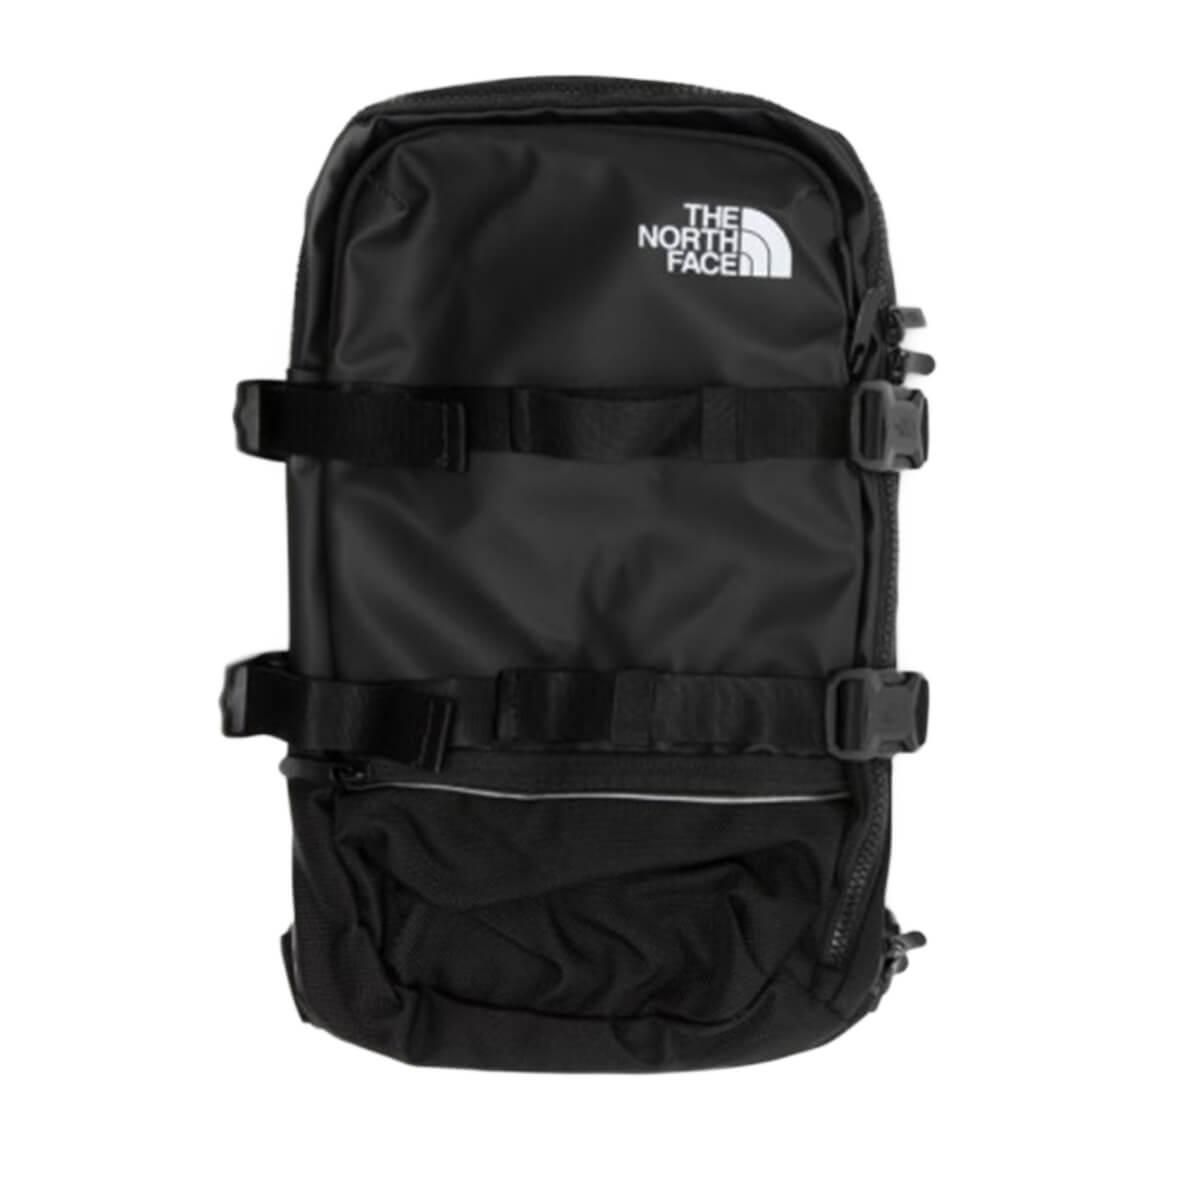 The North Face Commuter Pack Alt Carry Ανδρικό Υφασμάτινο Σακίδιο